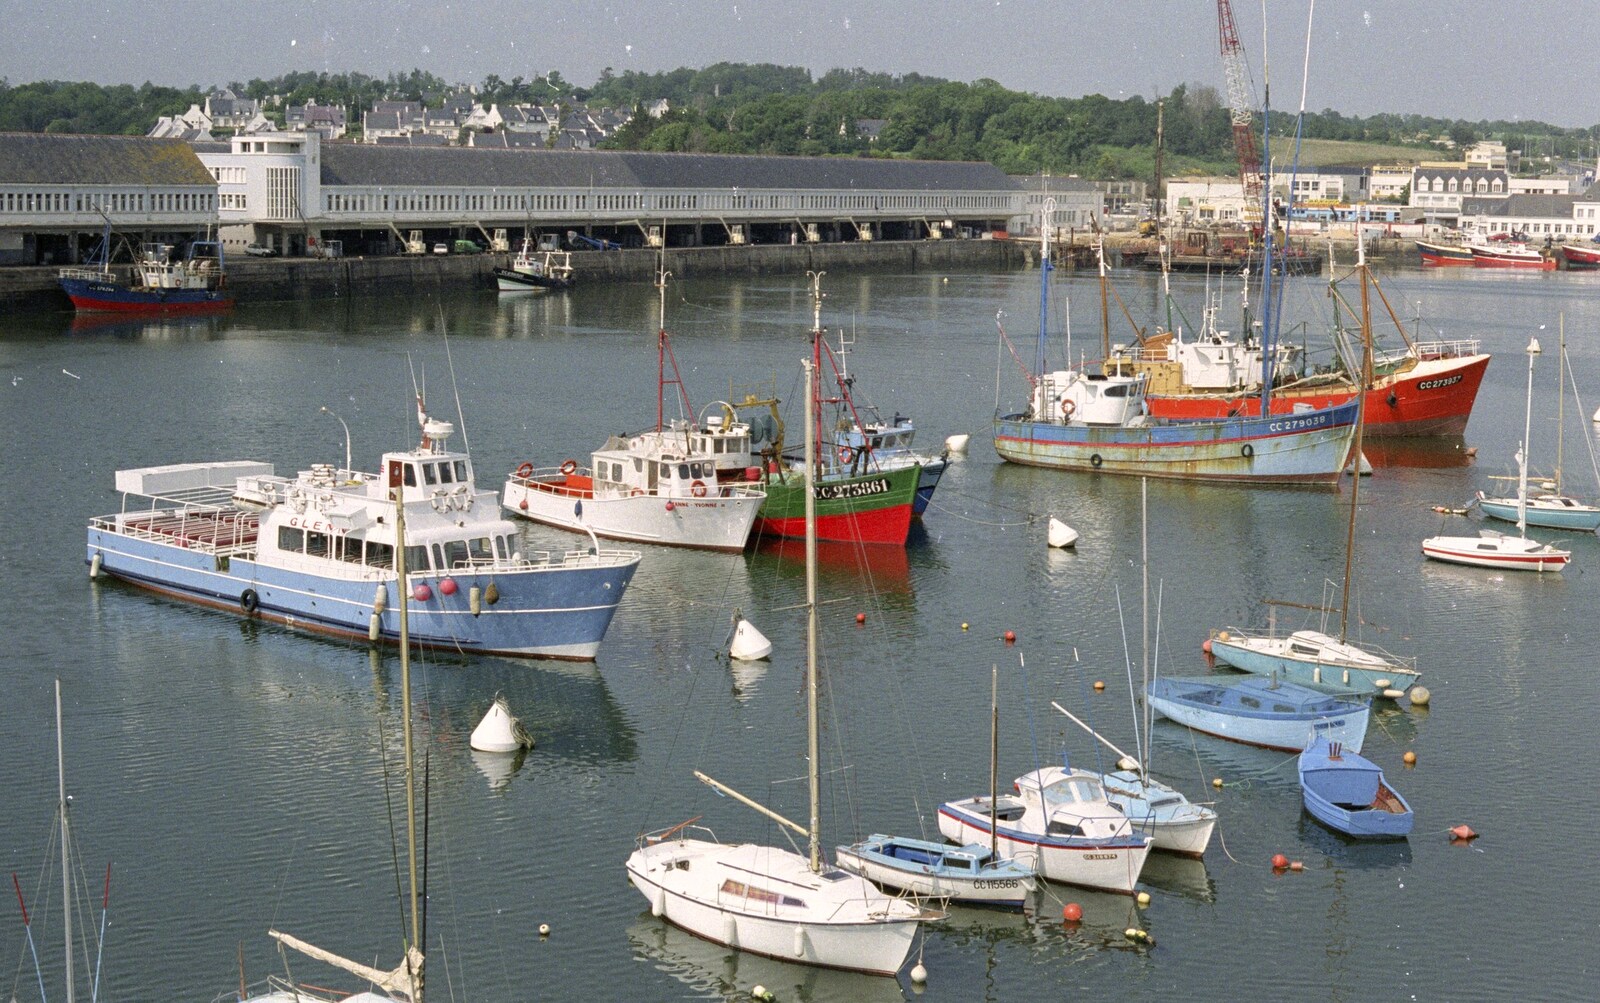 More boats at Concarneau from A Trip To Huelgoat, Brittany, France - 11th June 1990